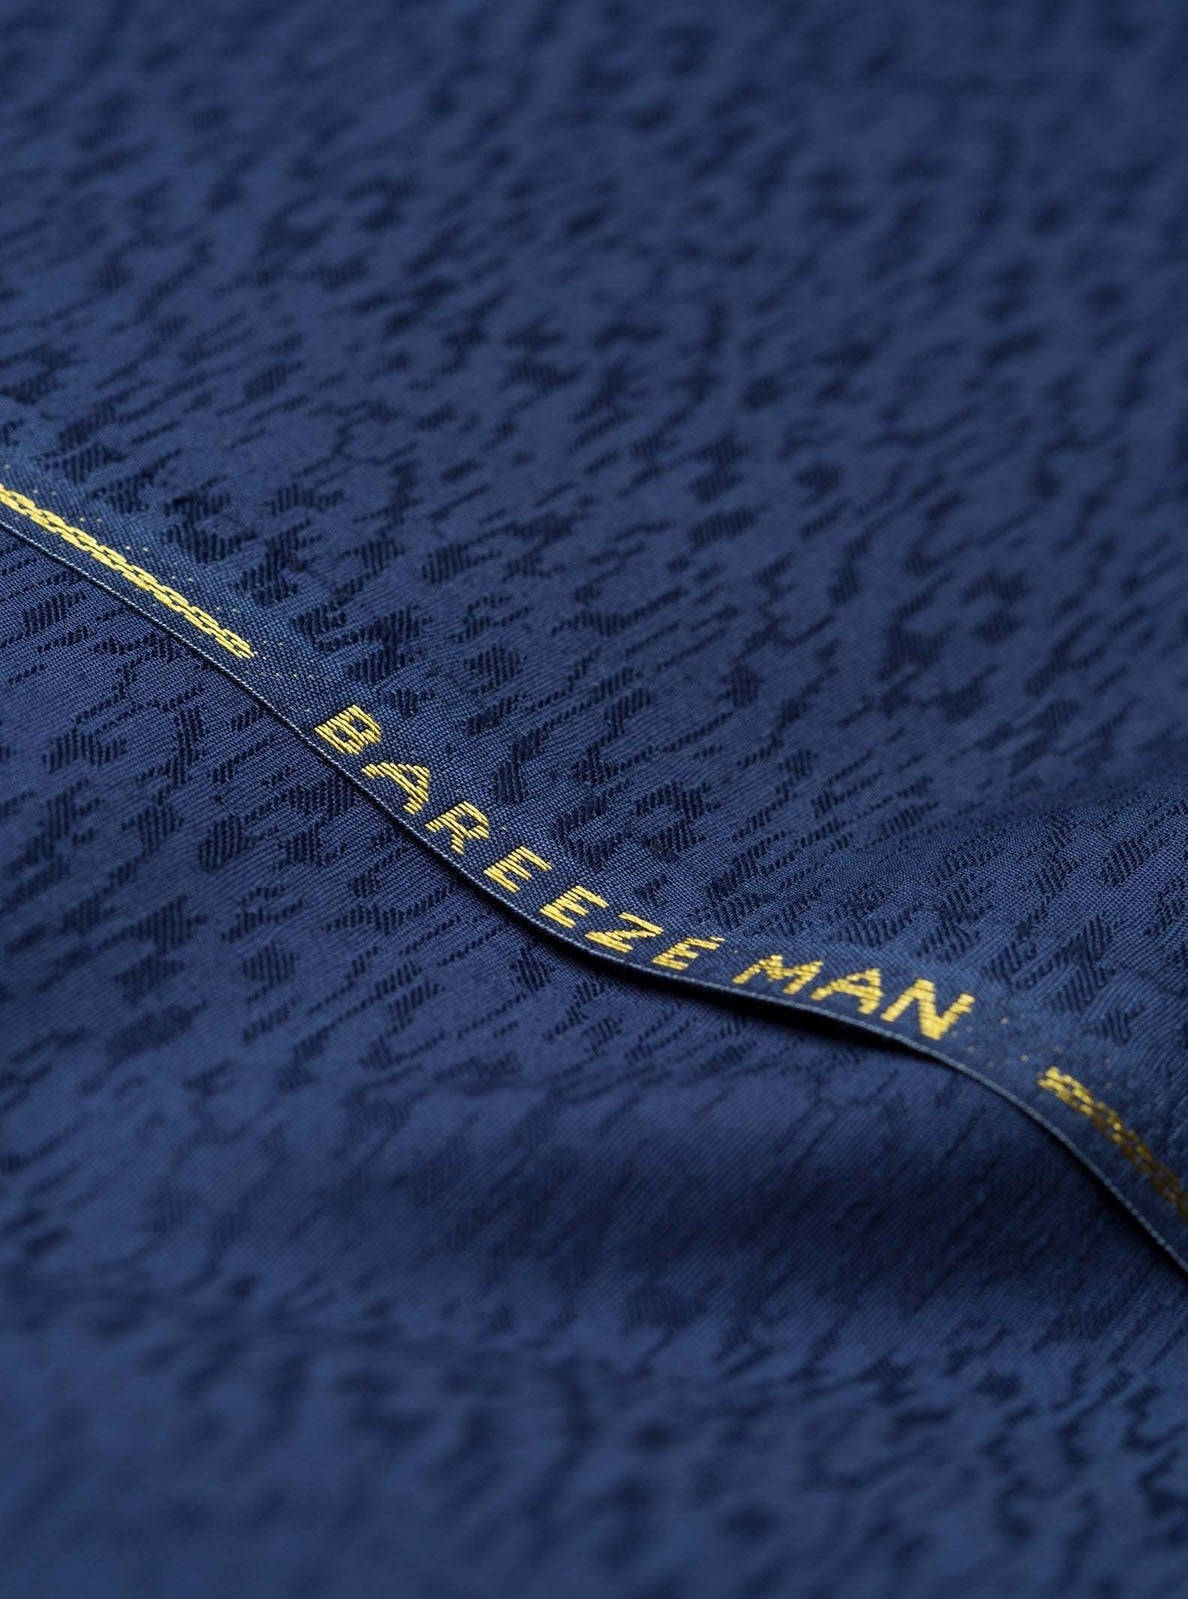 Bareeze Man Jacquard Unstitched Fabric for Summer - Navy Blue